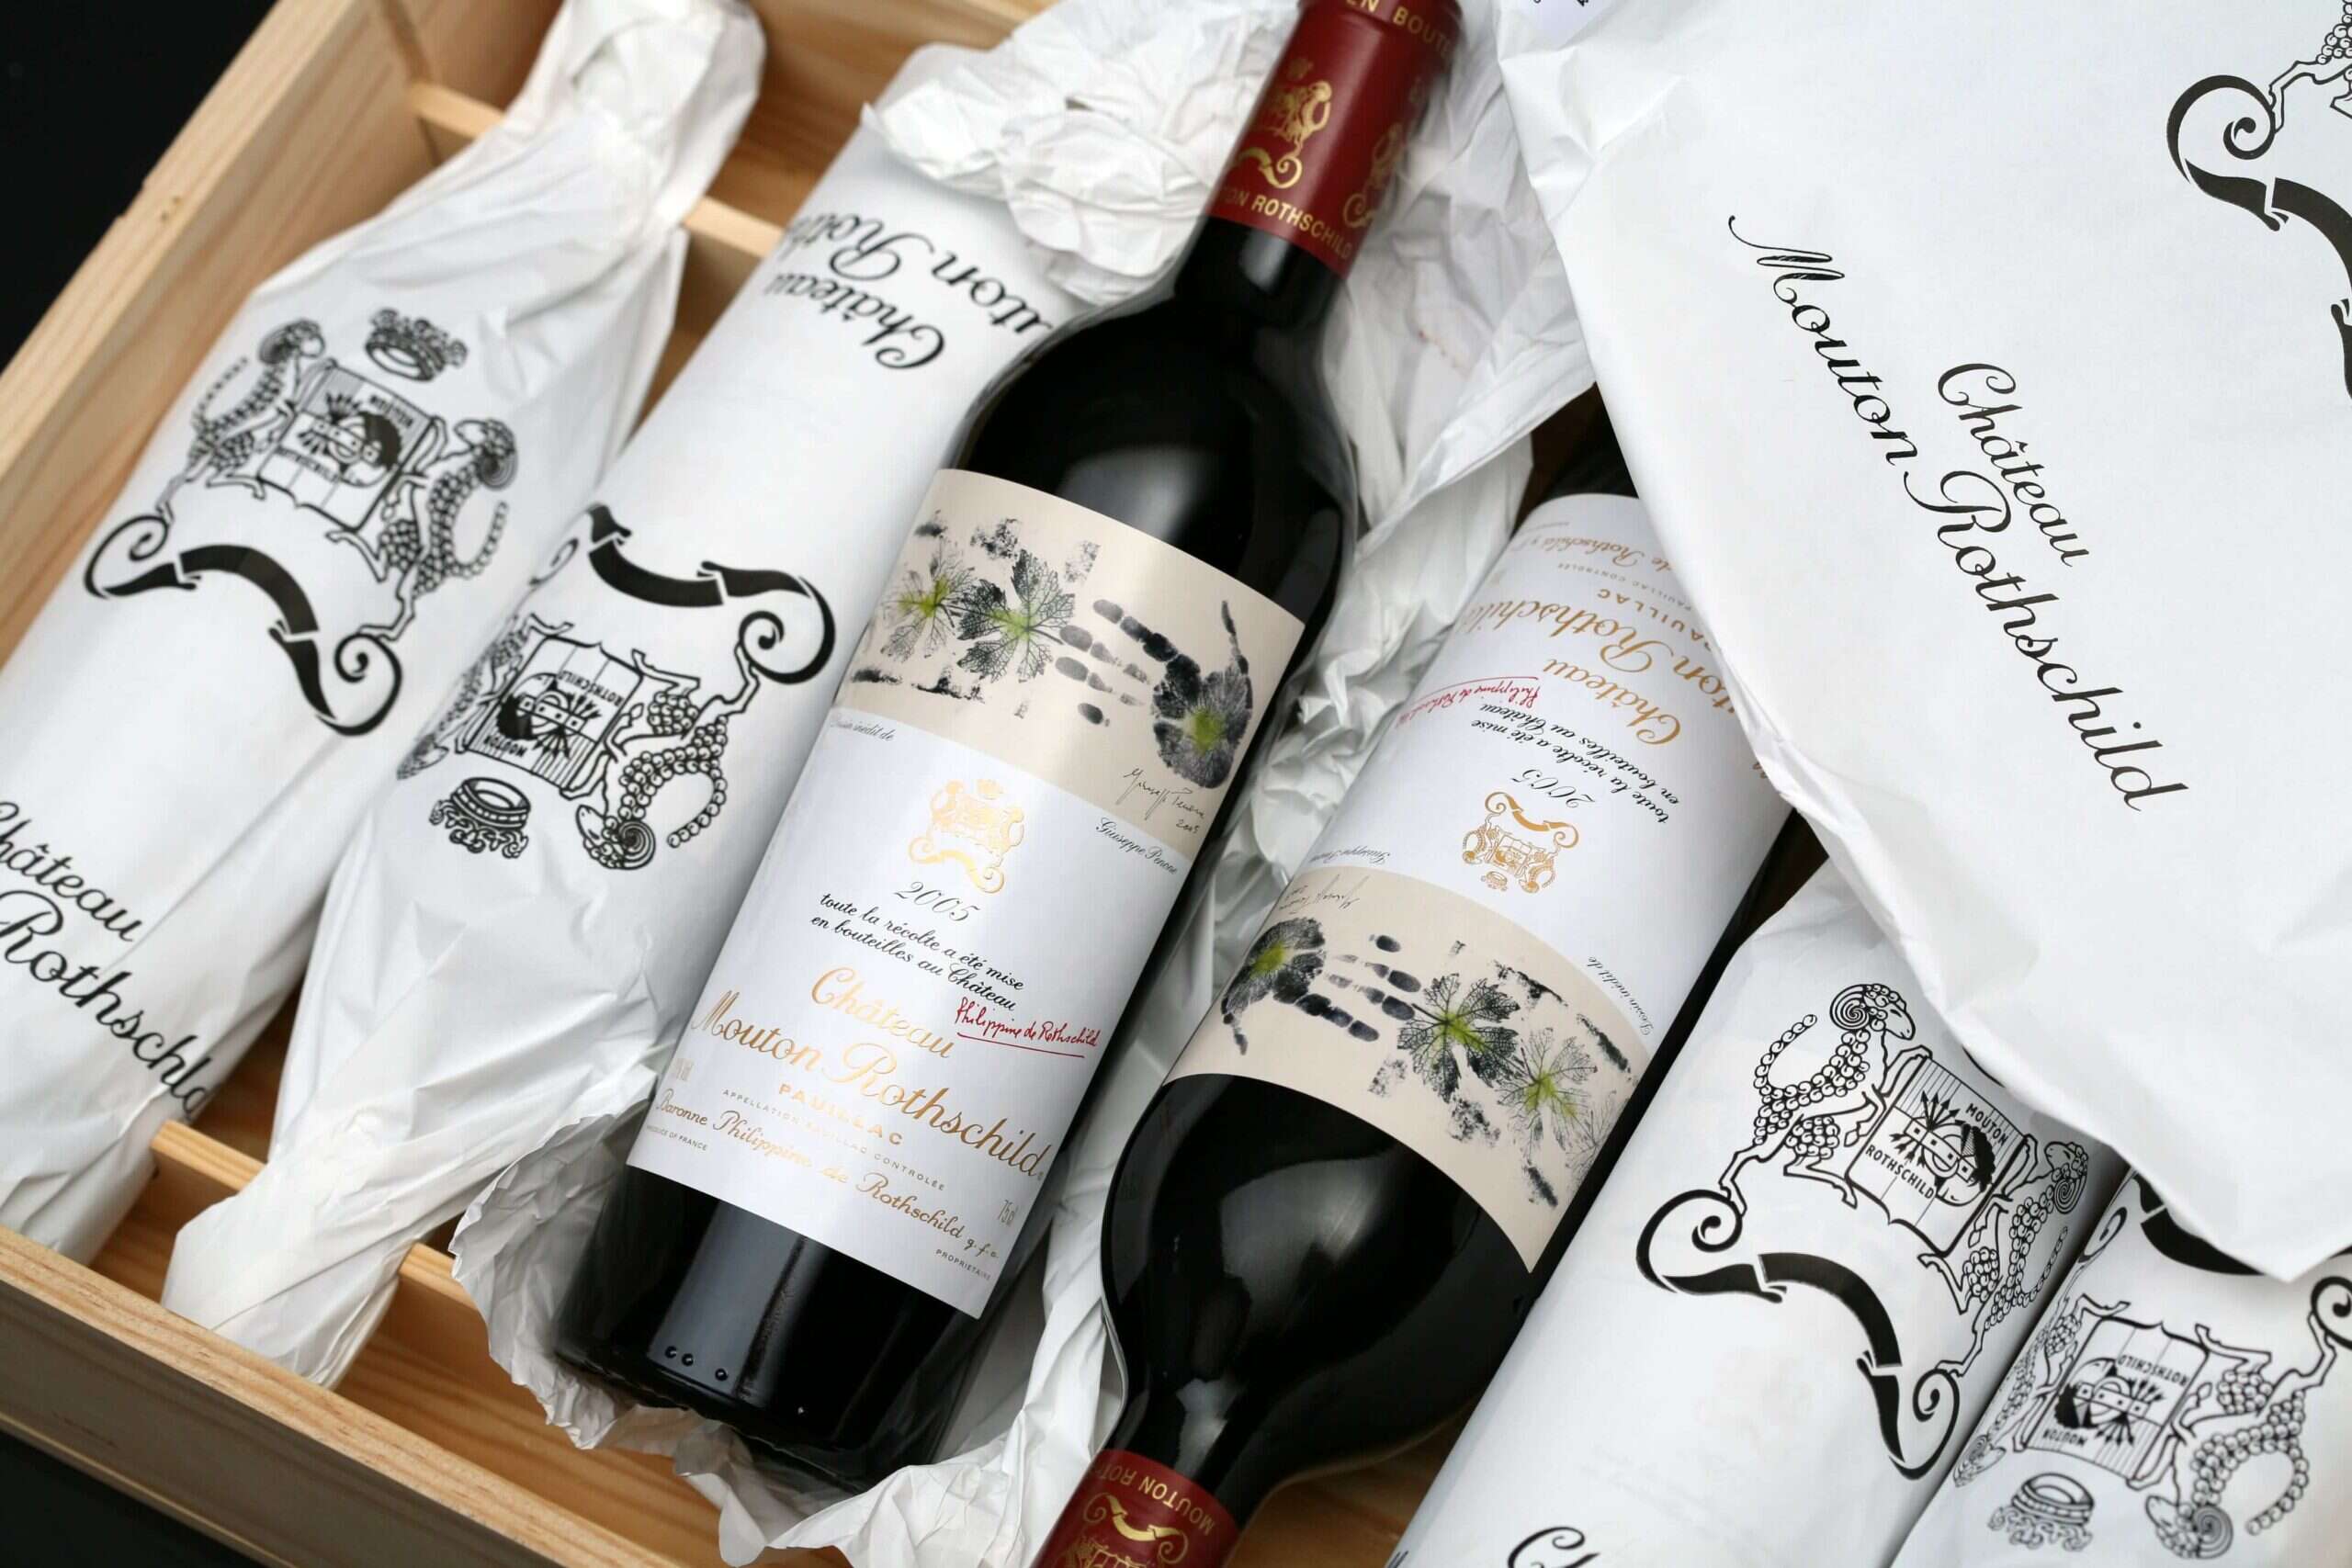 Château Mouton Rothschild: The art of wine